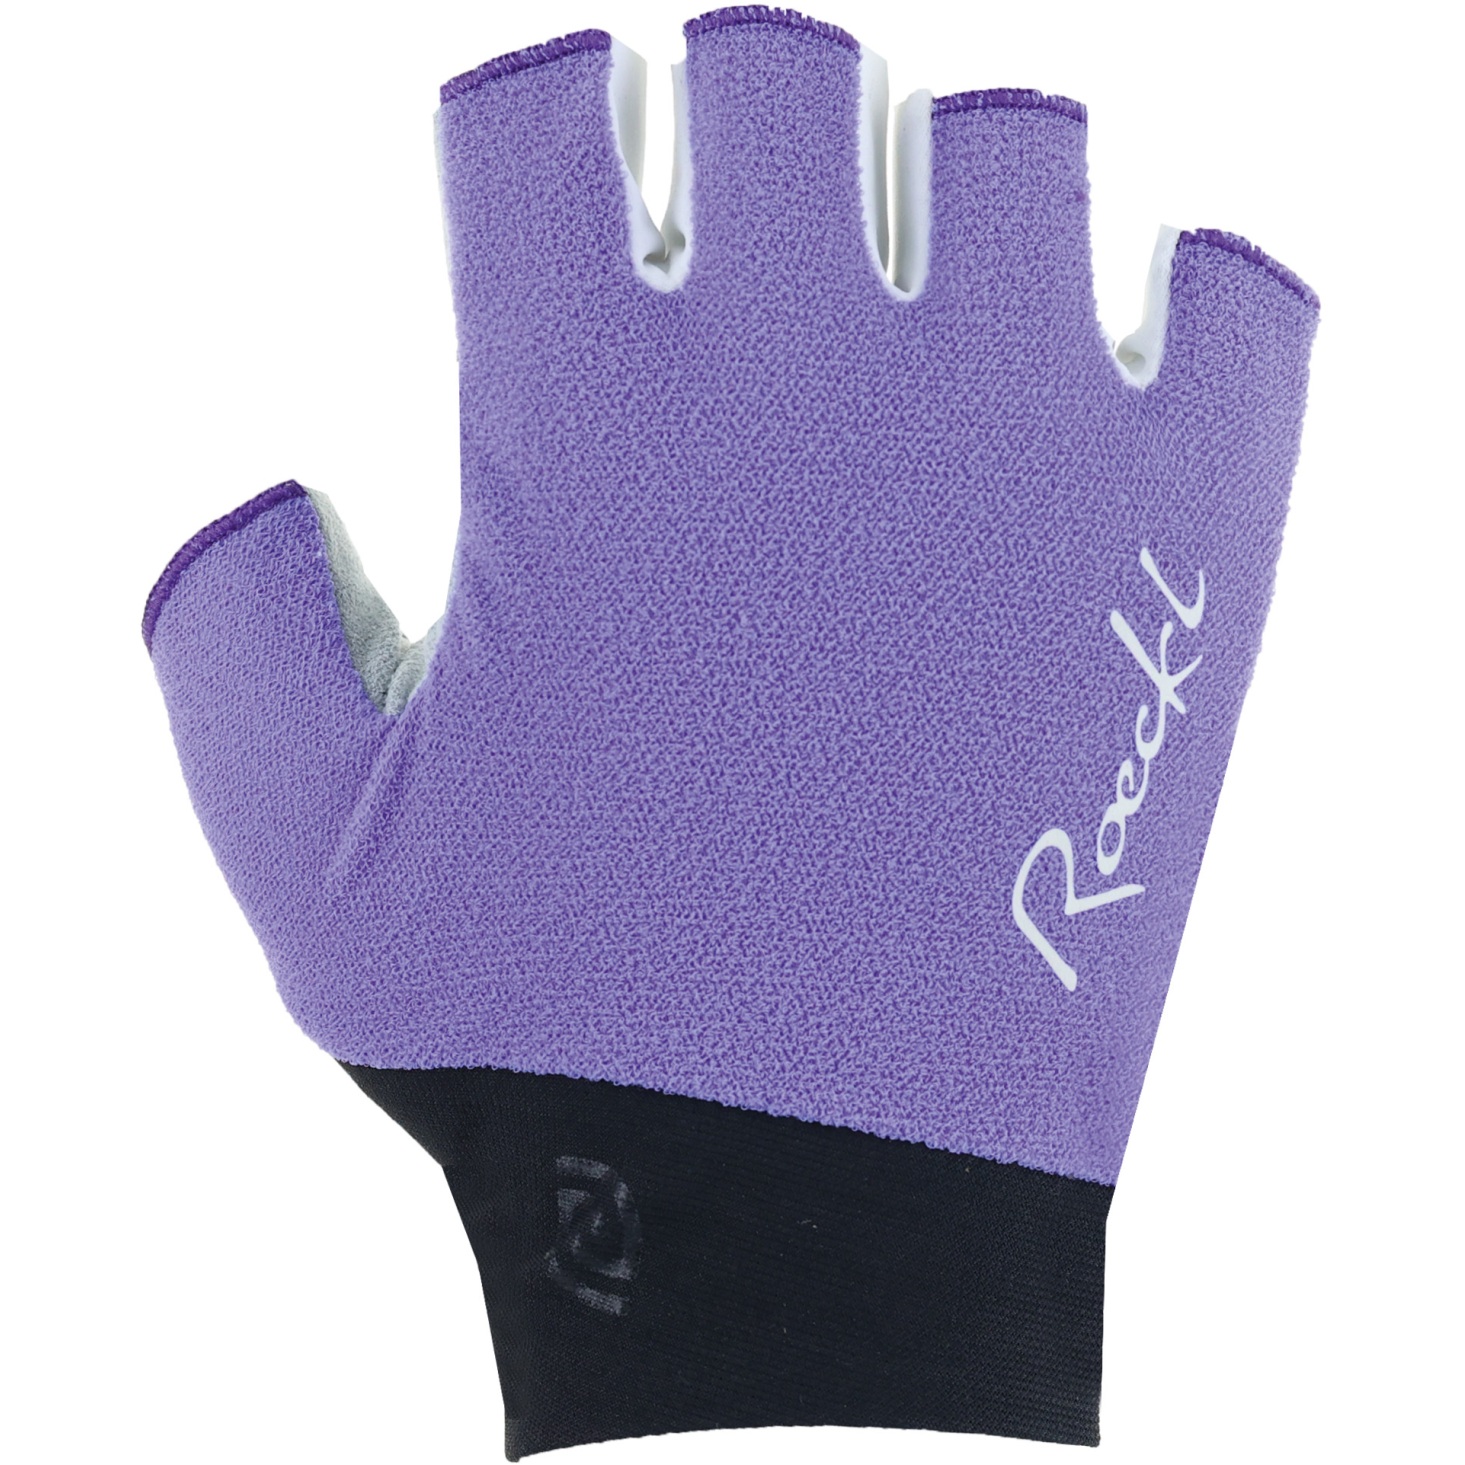 Picture of Roeckl Sports Deleni Cycling Gloves Women - fairytale 4780